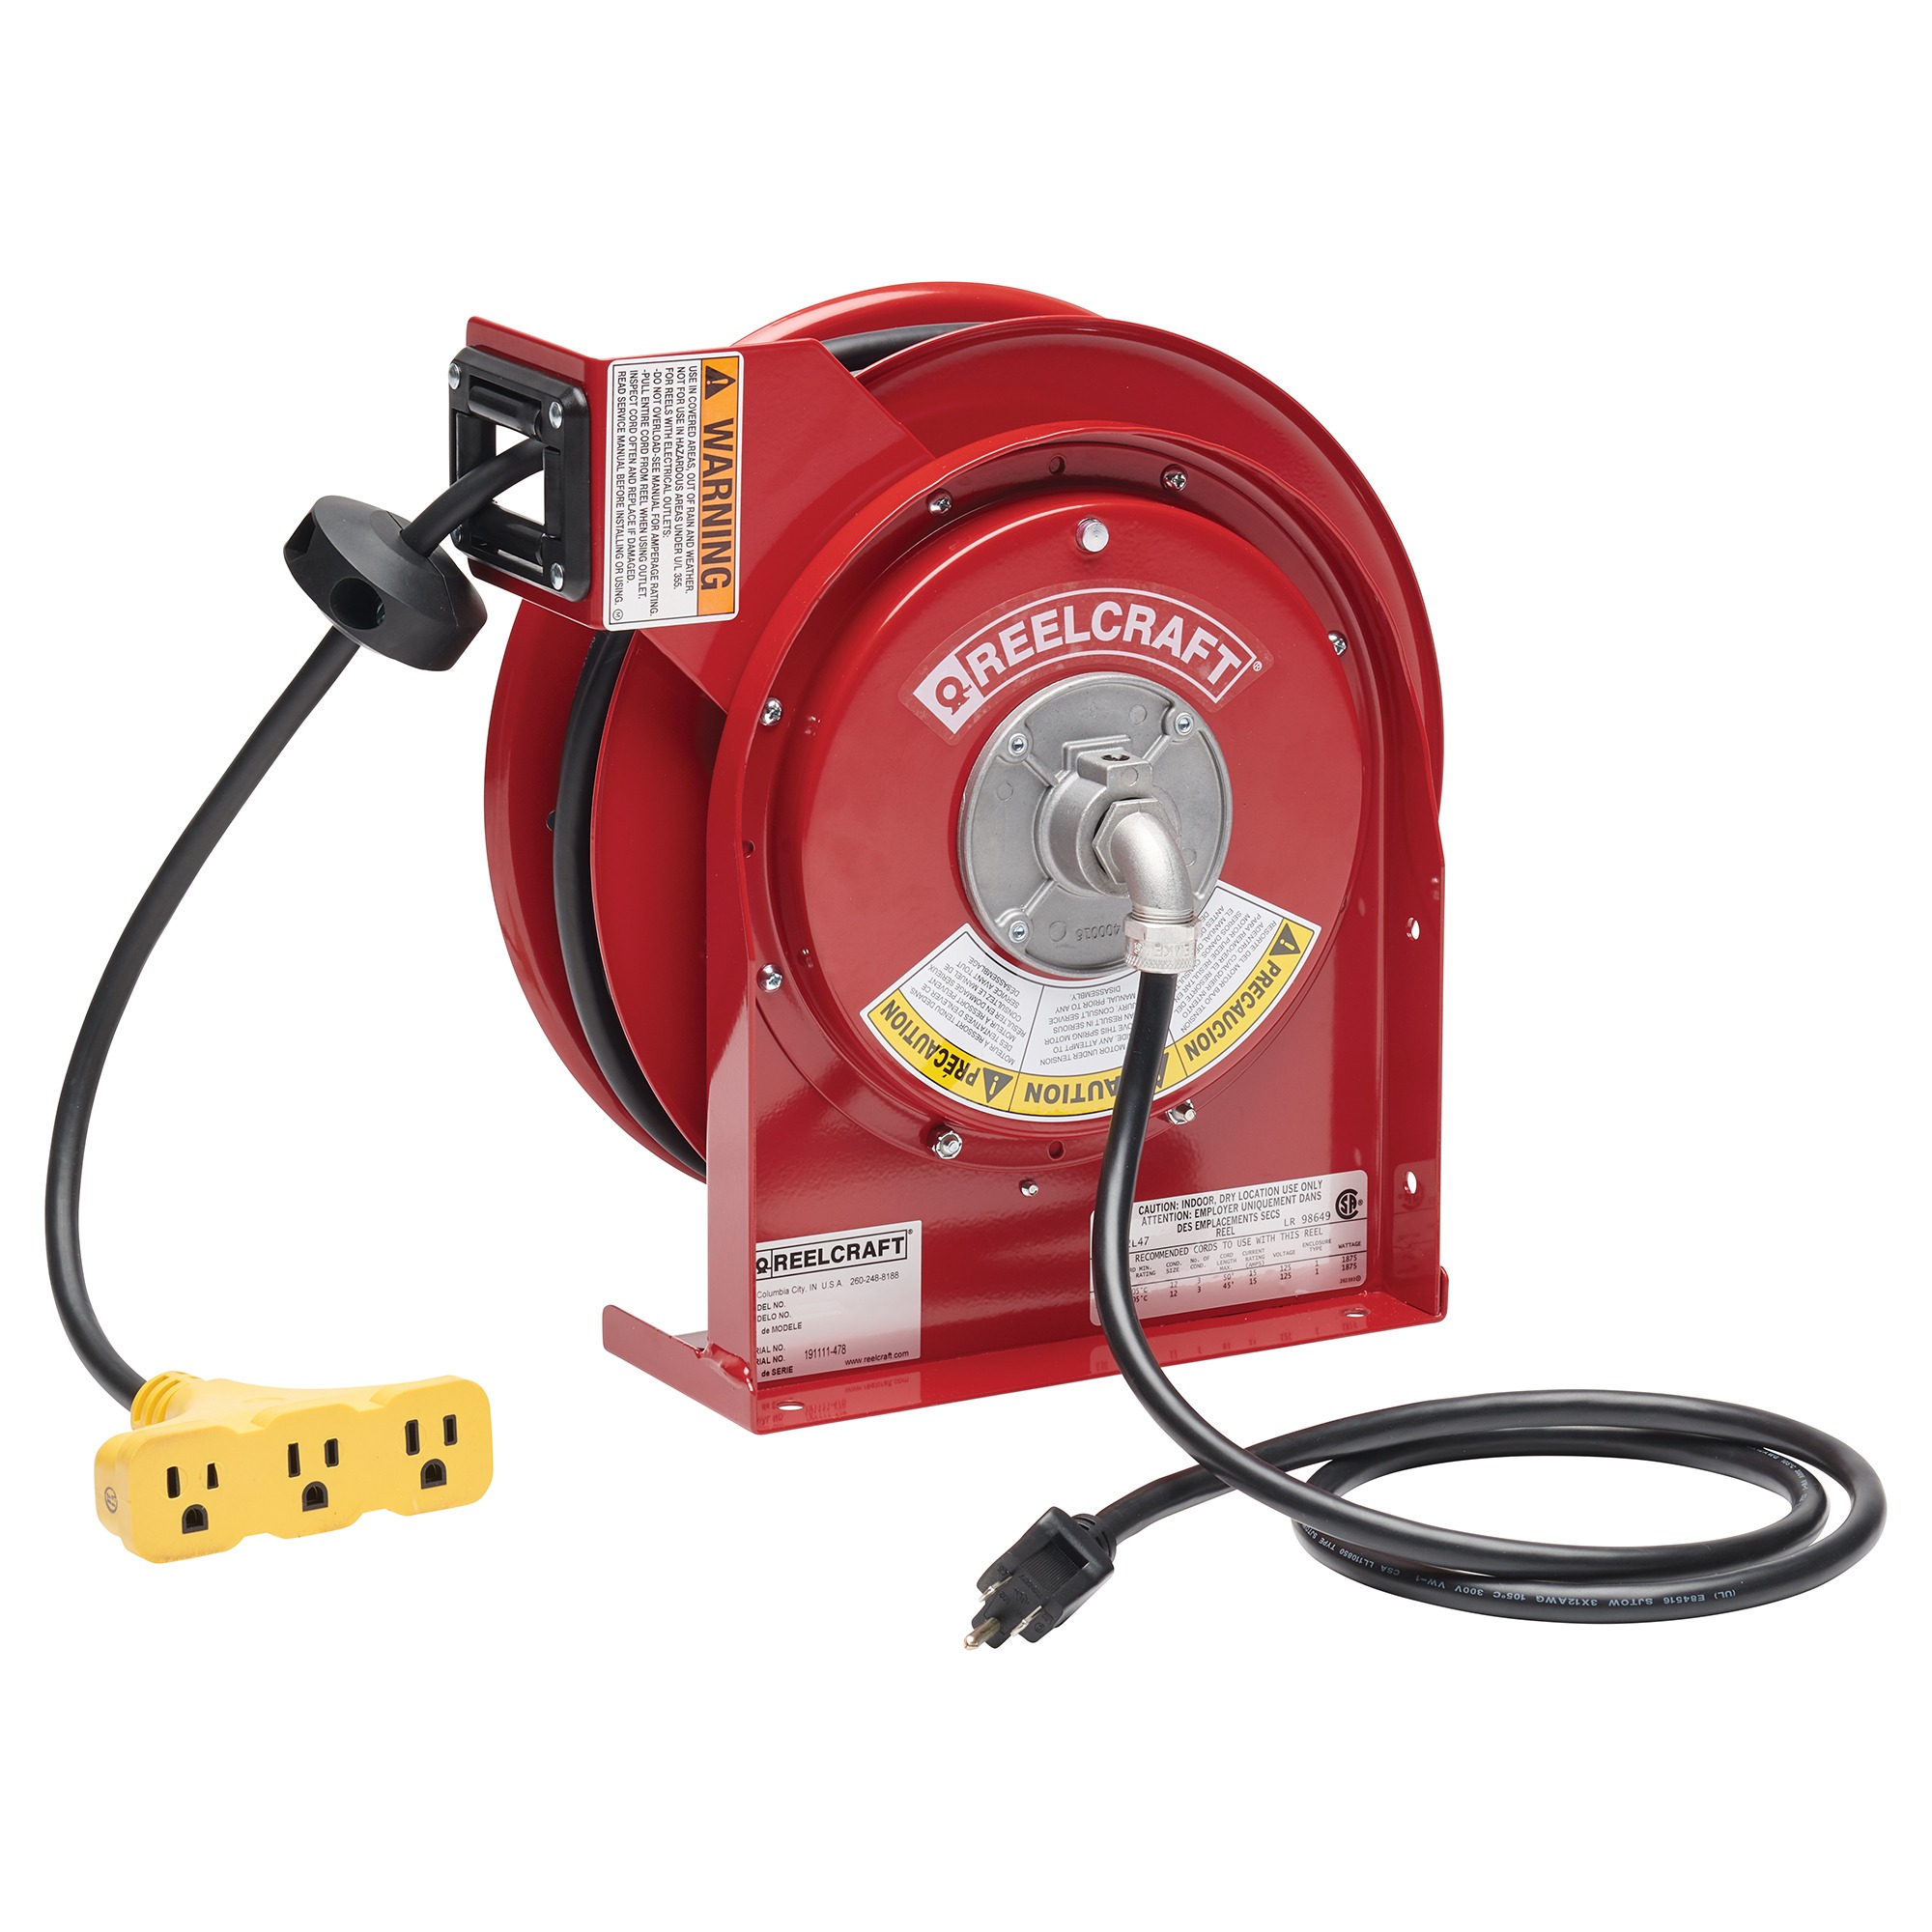 Power Cord Reels - Hose, Cord and Cable Reels - Reelcraft